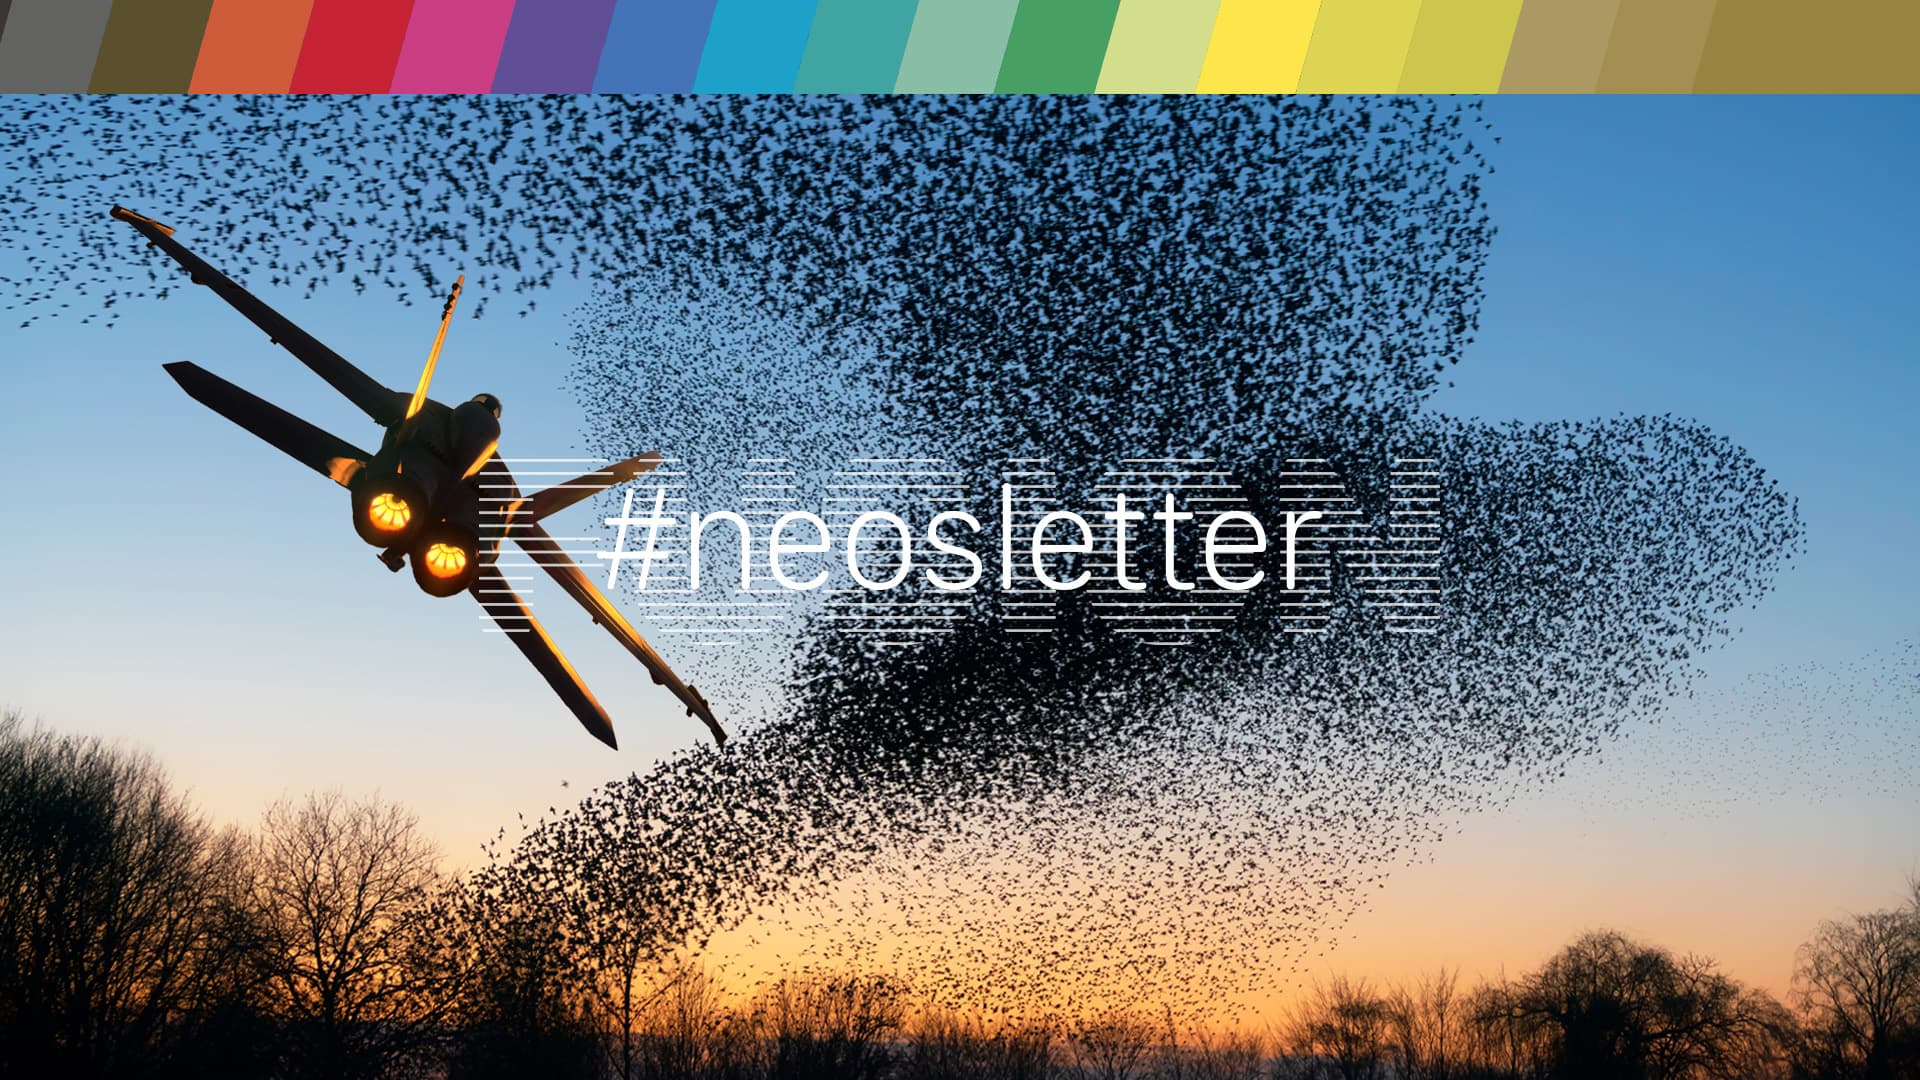 This surreal picture combines different subjects covered in the newsletter. It shows a lone fighter aircraft, used to symbolise a maverick creative person, flying into a flock of starlings, which symbolises creative collaboration.